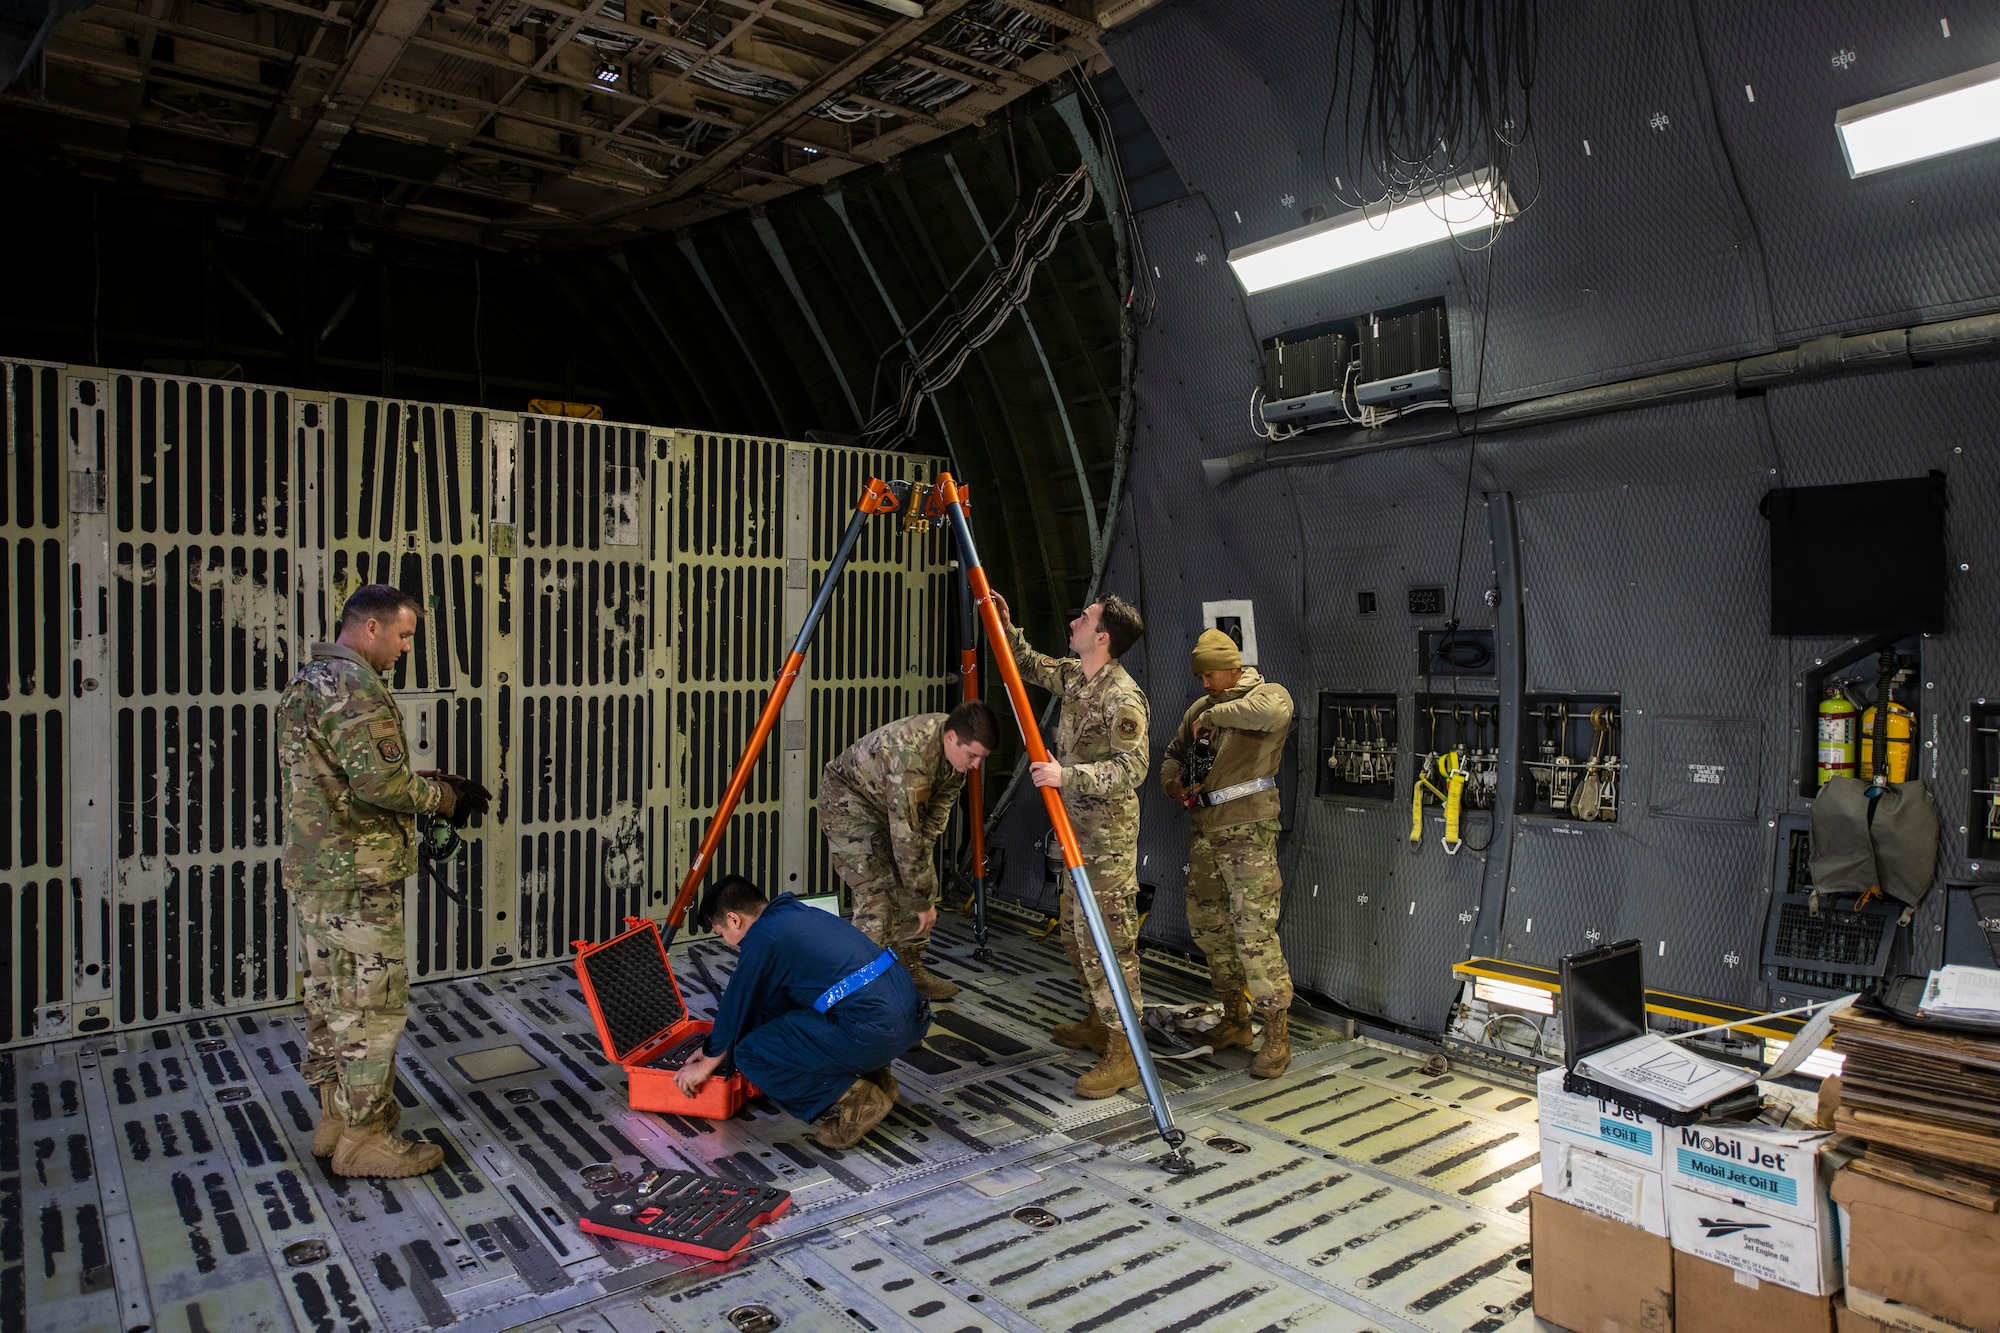 Men in uniform are preparing to replace a piece of machinery with rope on a large military aircraft.